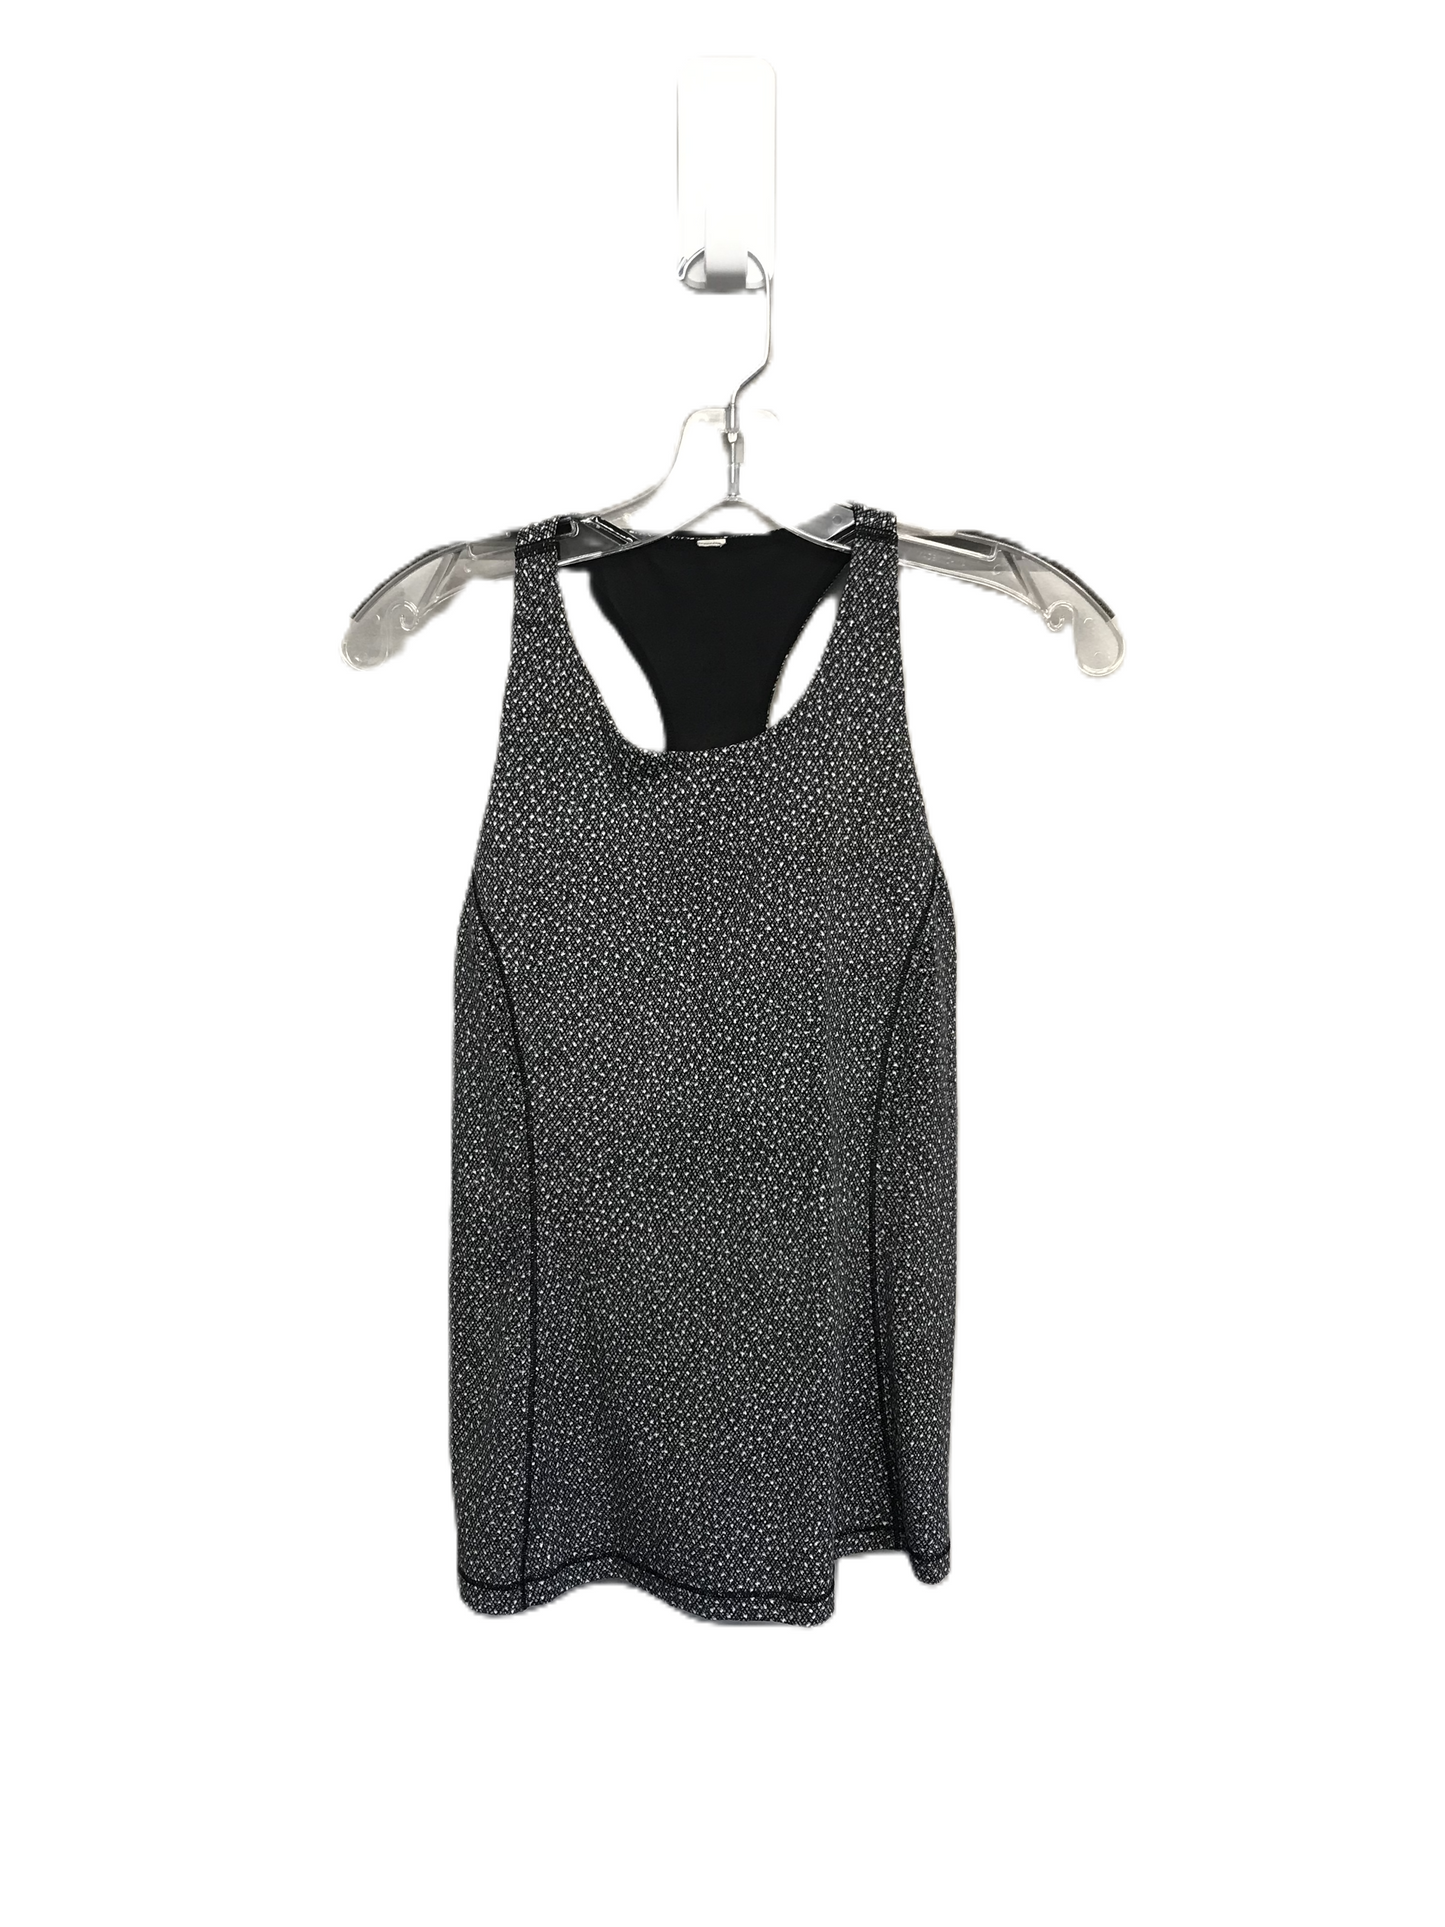 Black & White Athletic Tank Top By Lululemon, Size: S